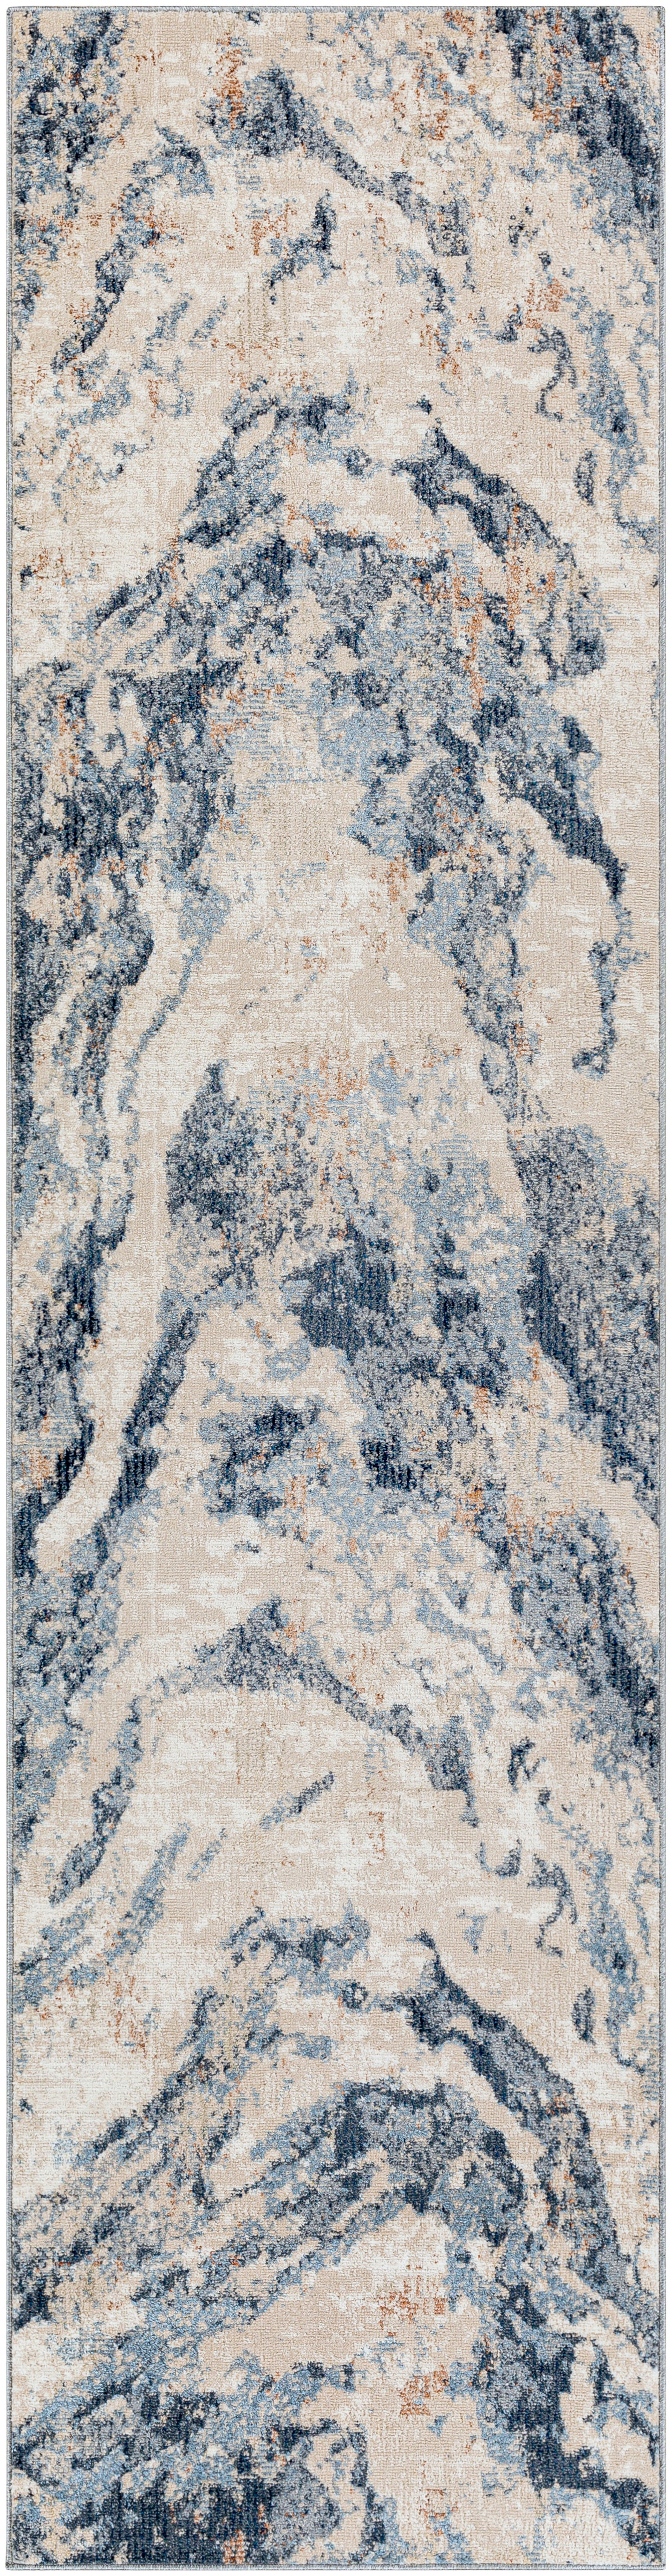 Amore 30398 Machine Woven Synthetic Blend Indoor Area Rug by Surya Rugs